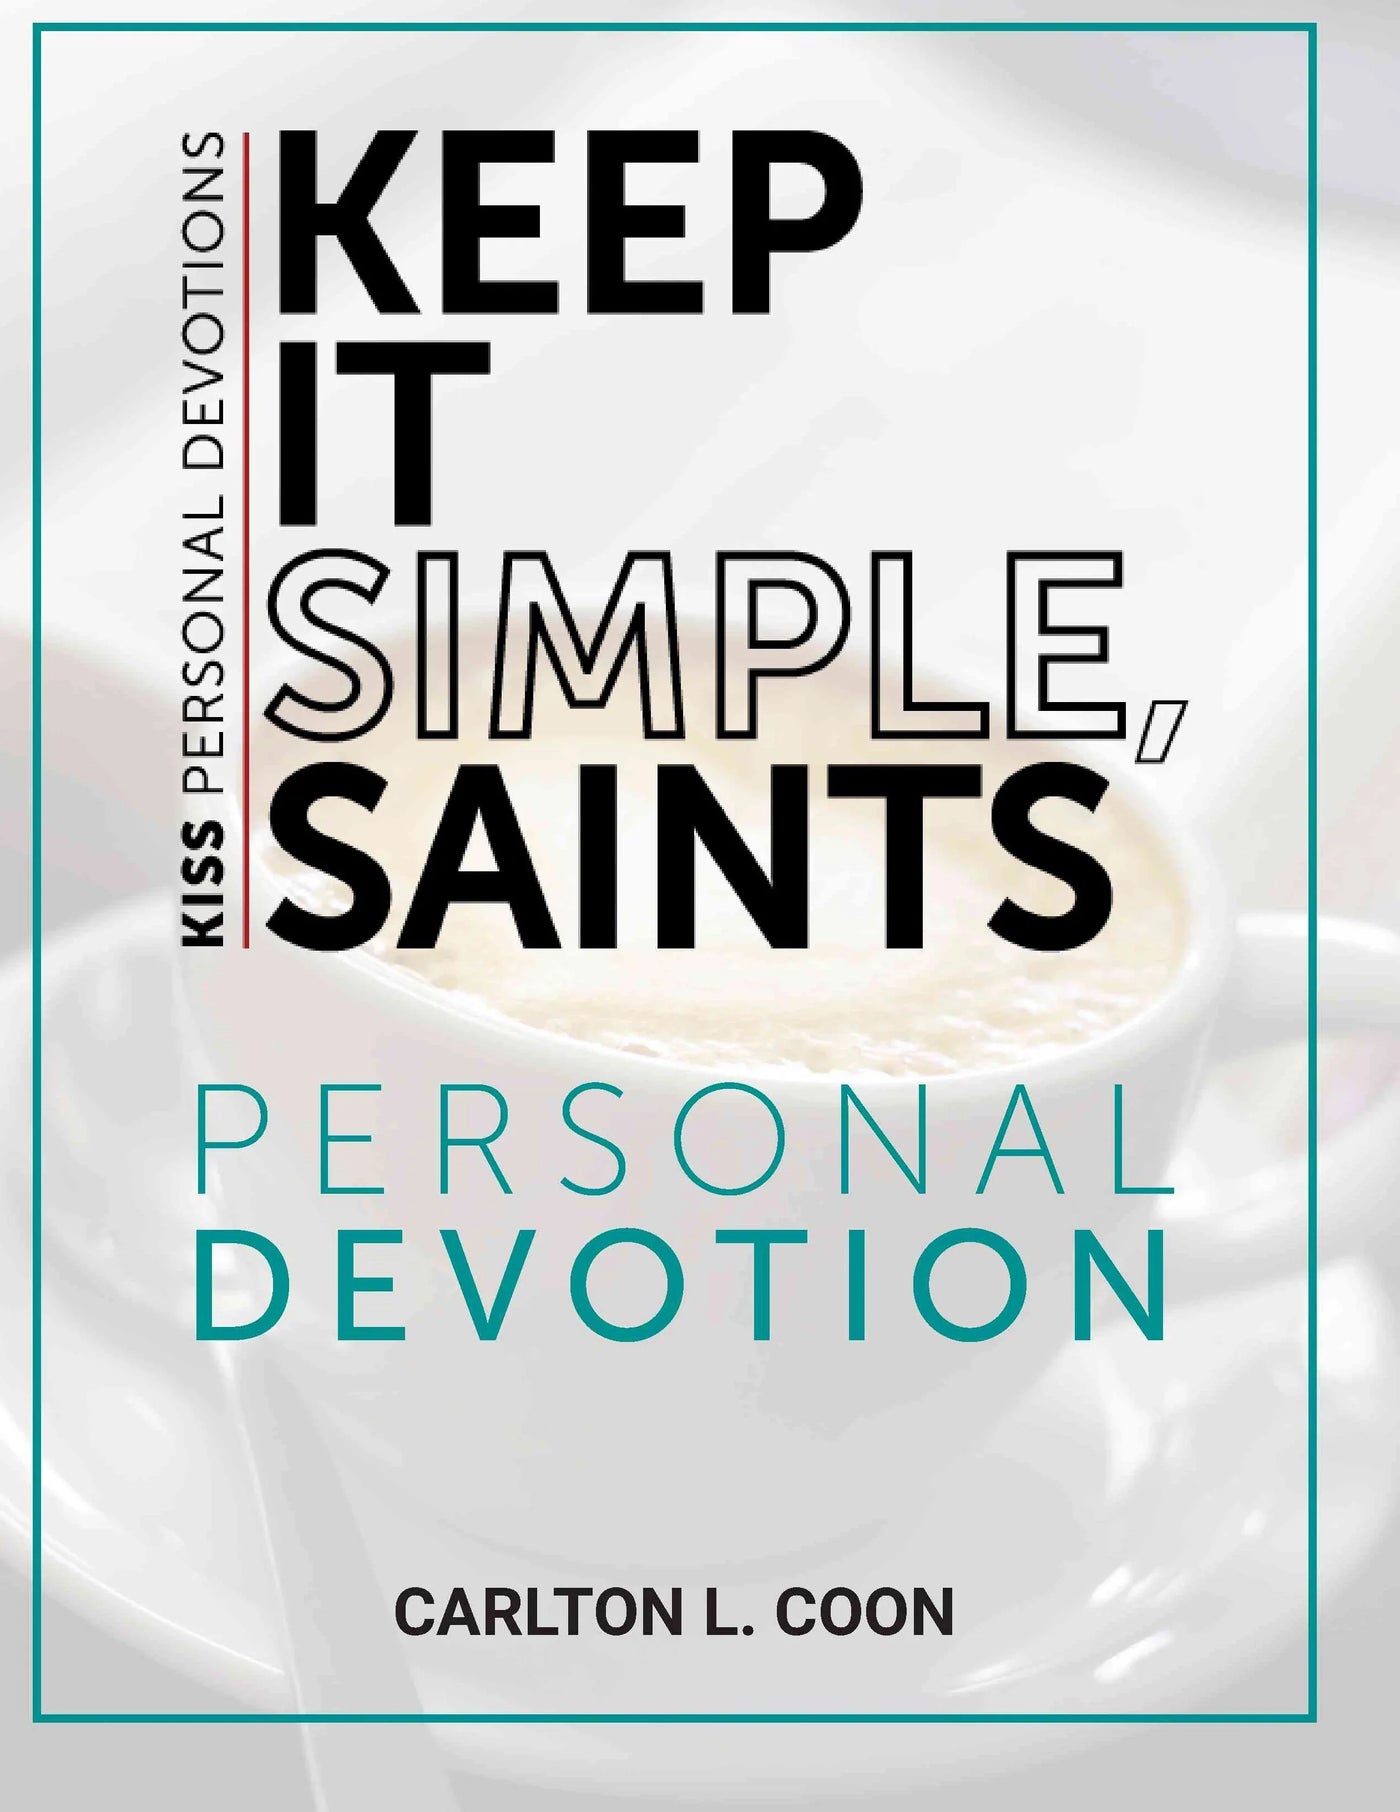 VIDEO TRAINING PLUS Read One - Give One Personal Devotion - Keep It Simple Saints (K.I.S.S.)